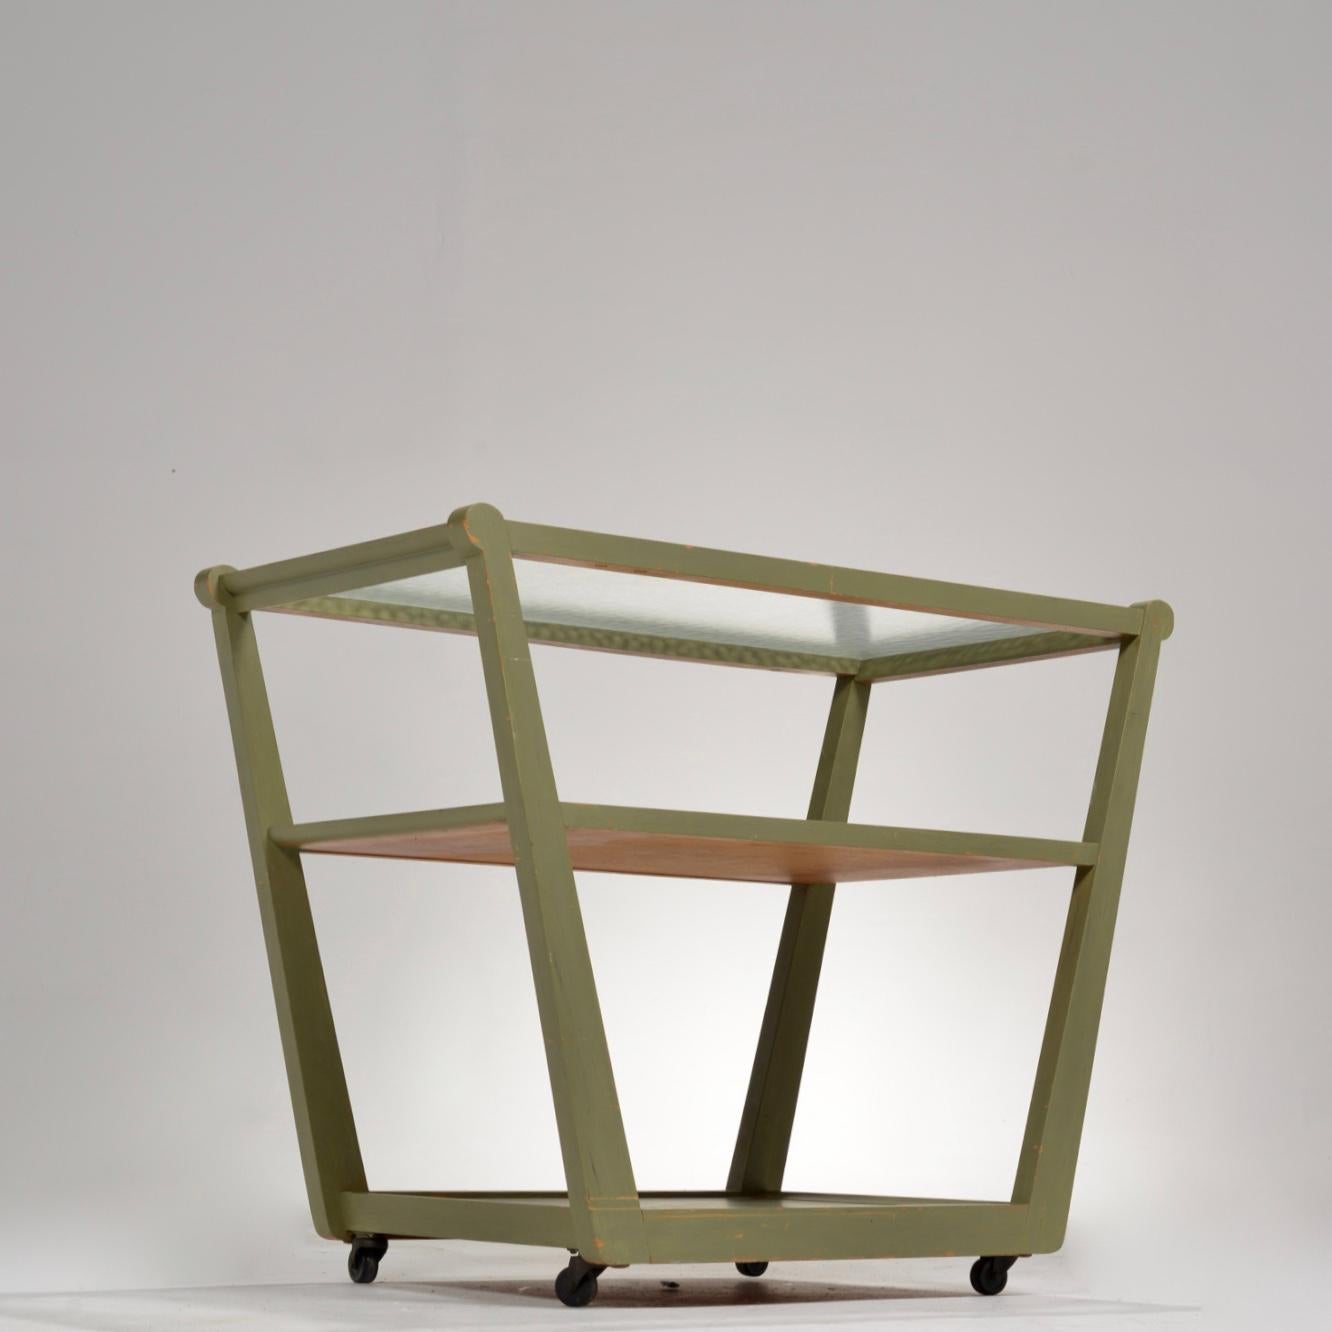 Pistachio green rolling bar cart from the Precedent series by Edward Wormley for Dunbar circa 1960. 
3 tiered rolling cart featuring a textured glass top and casters. 

Precedent by Drexel stenciled on the bottom.